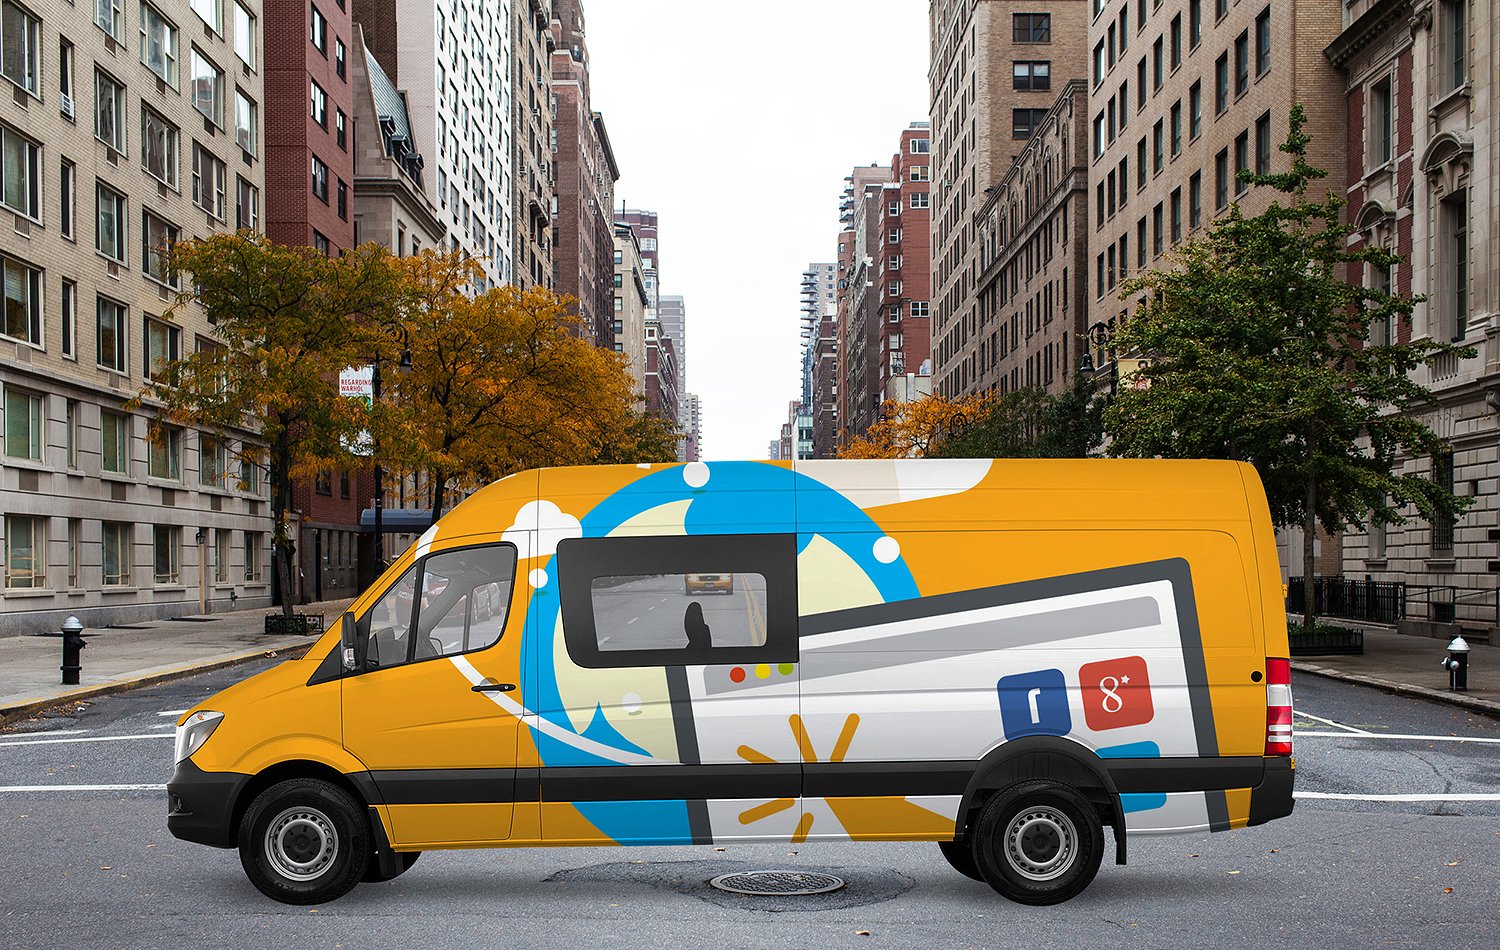 A yellow van in the city mockup